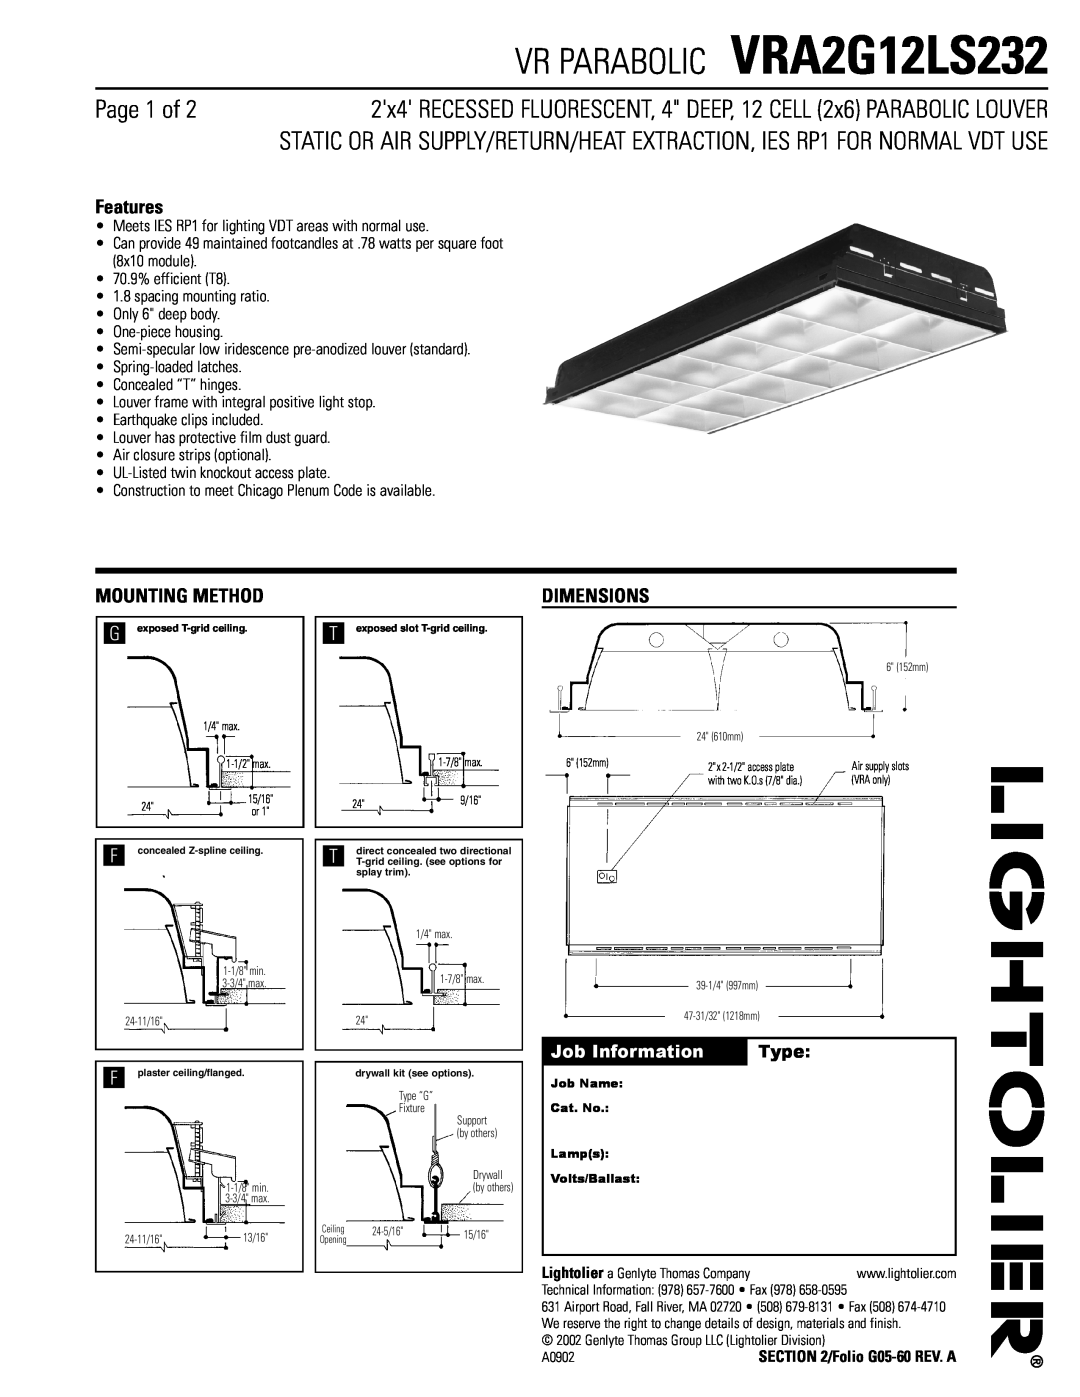 Lightolier dimensions VR PARABOLIC VRA2G12LS232, Page 1 of, Features, Mounting Method, Dimensions, Job Information 